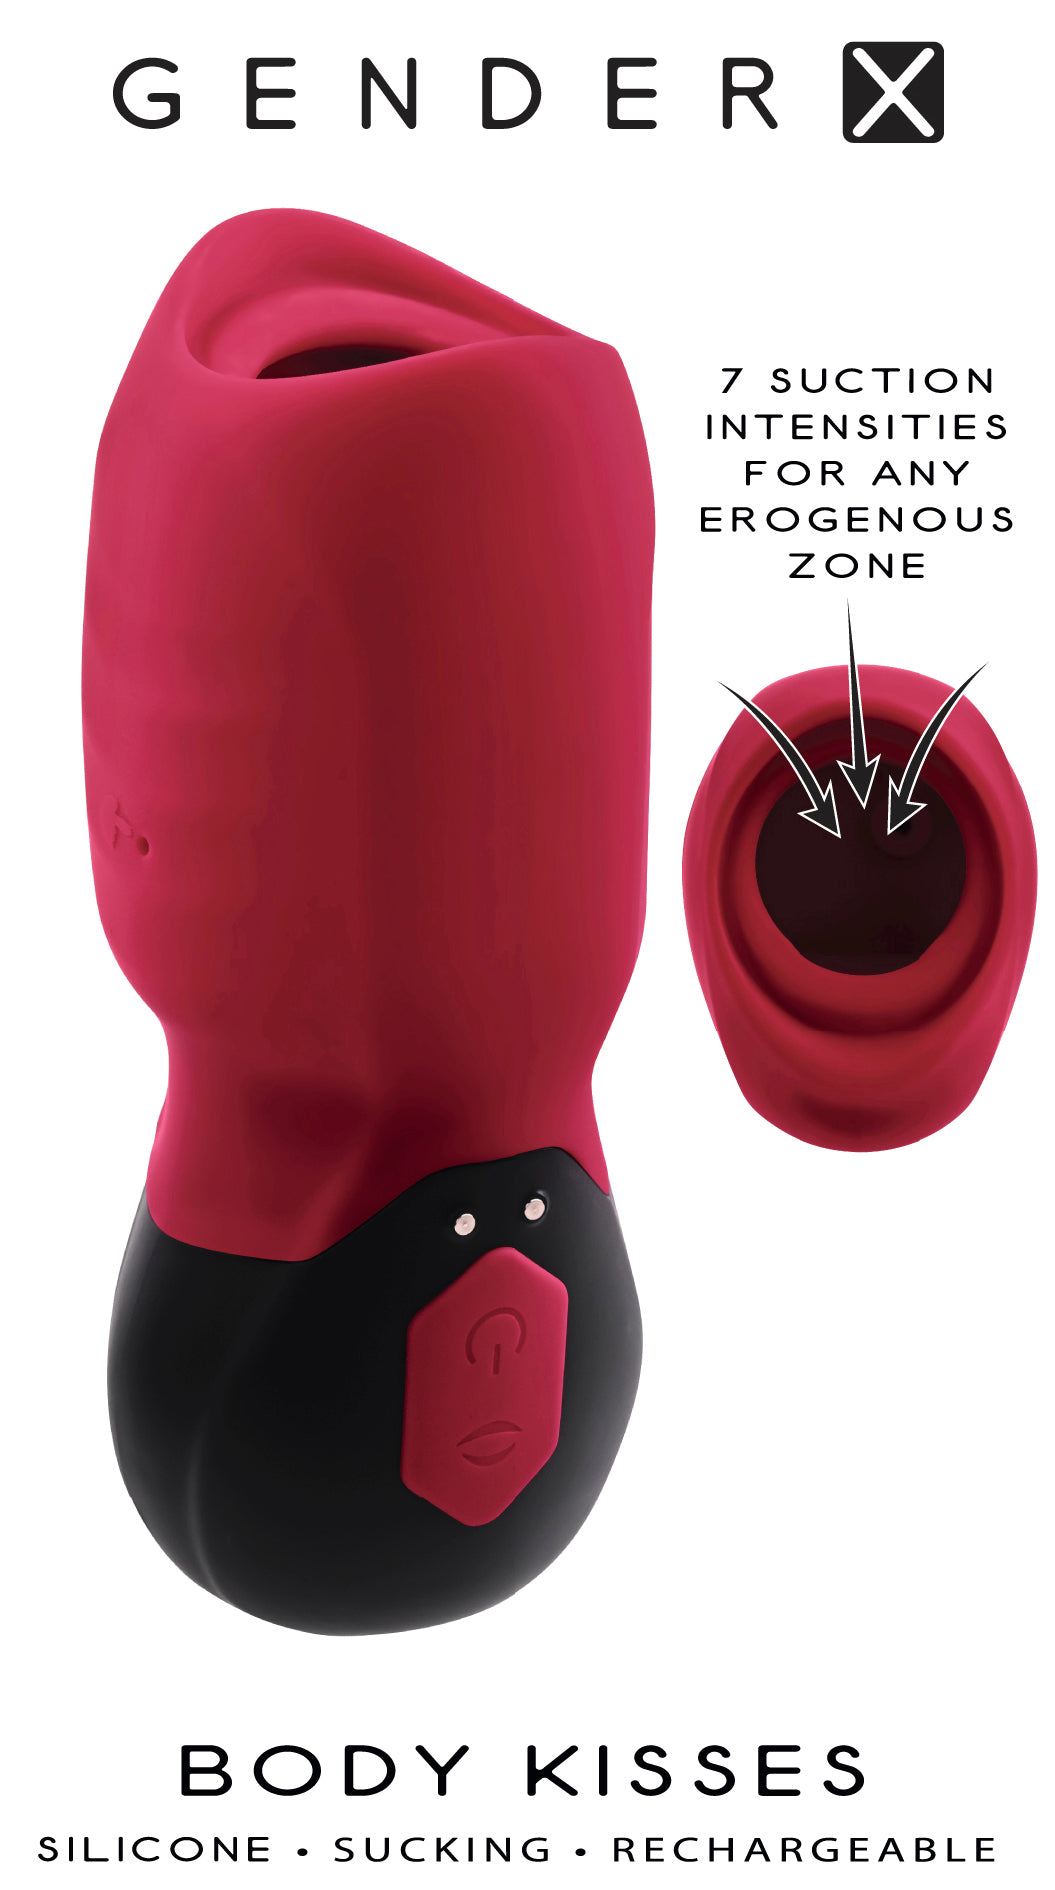 An illustration showing some of the features of the Body Kisses Vibrating Suction Massager.